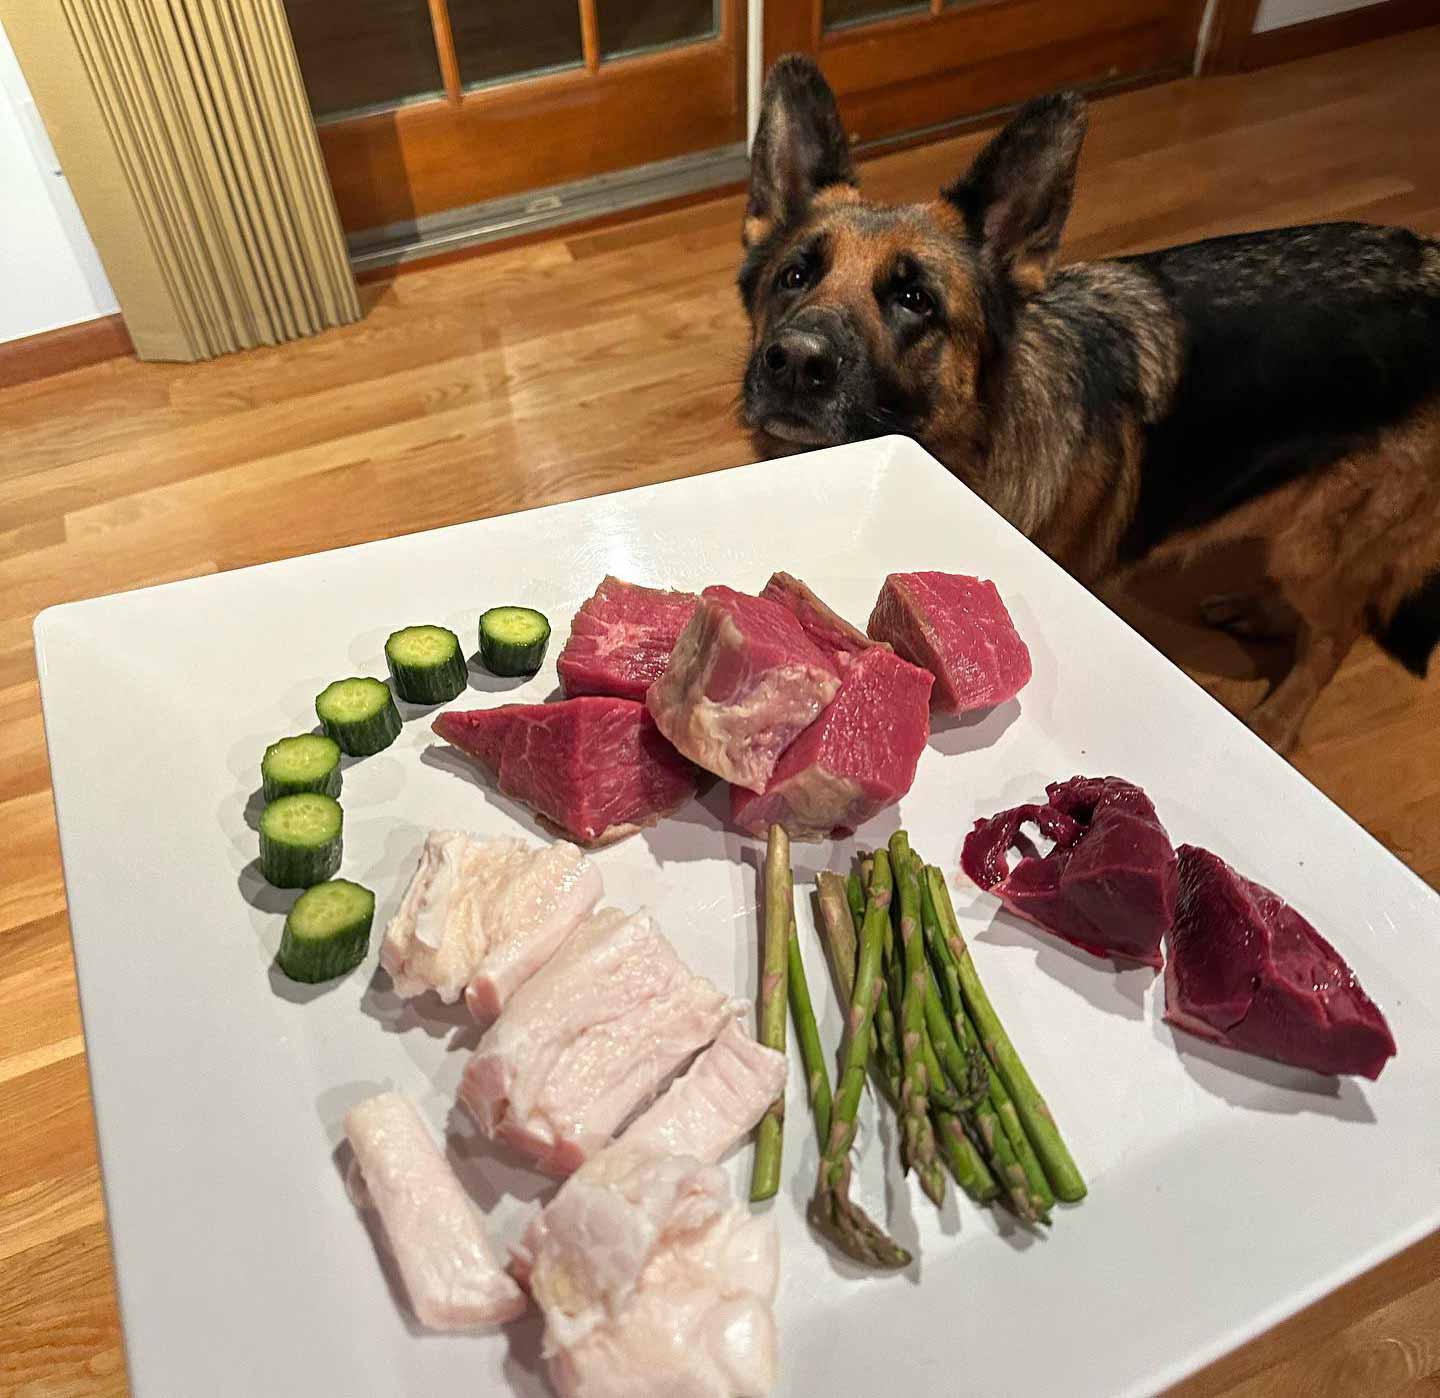 Dog is looking at a plate with raw meat